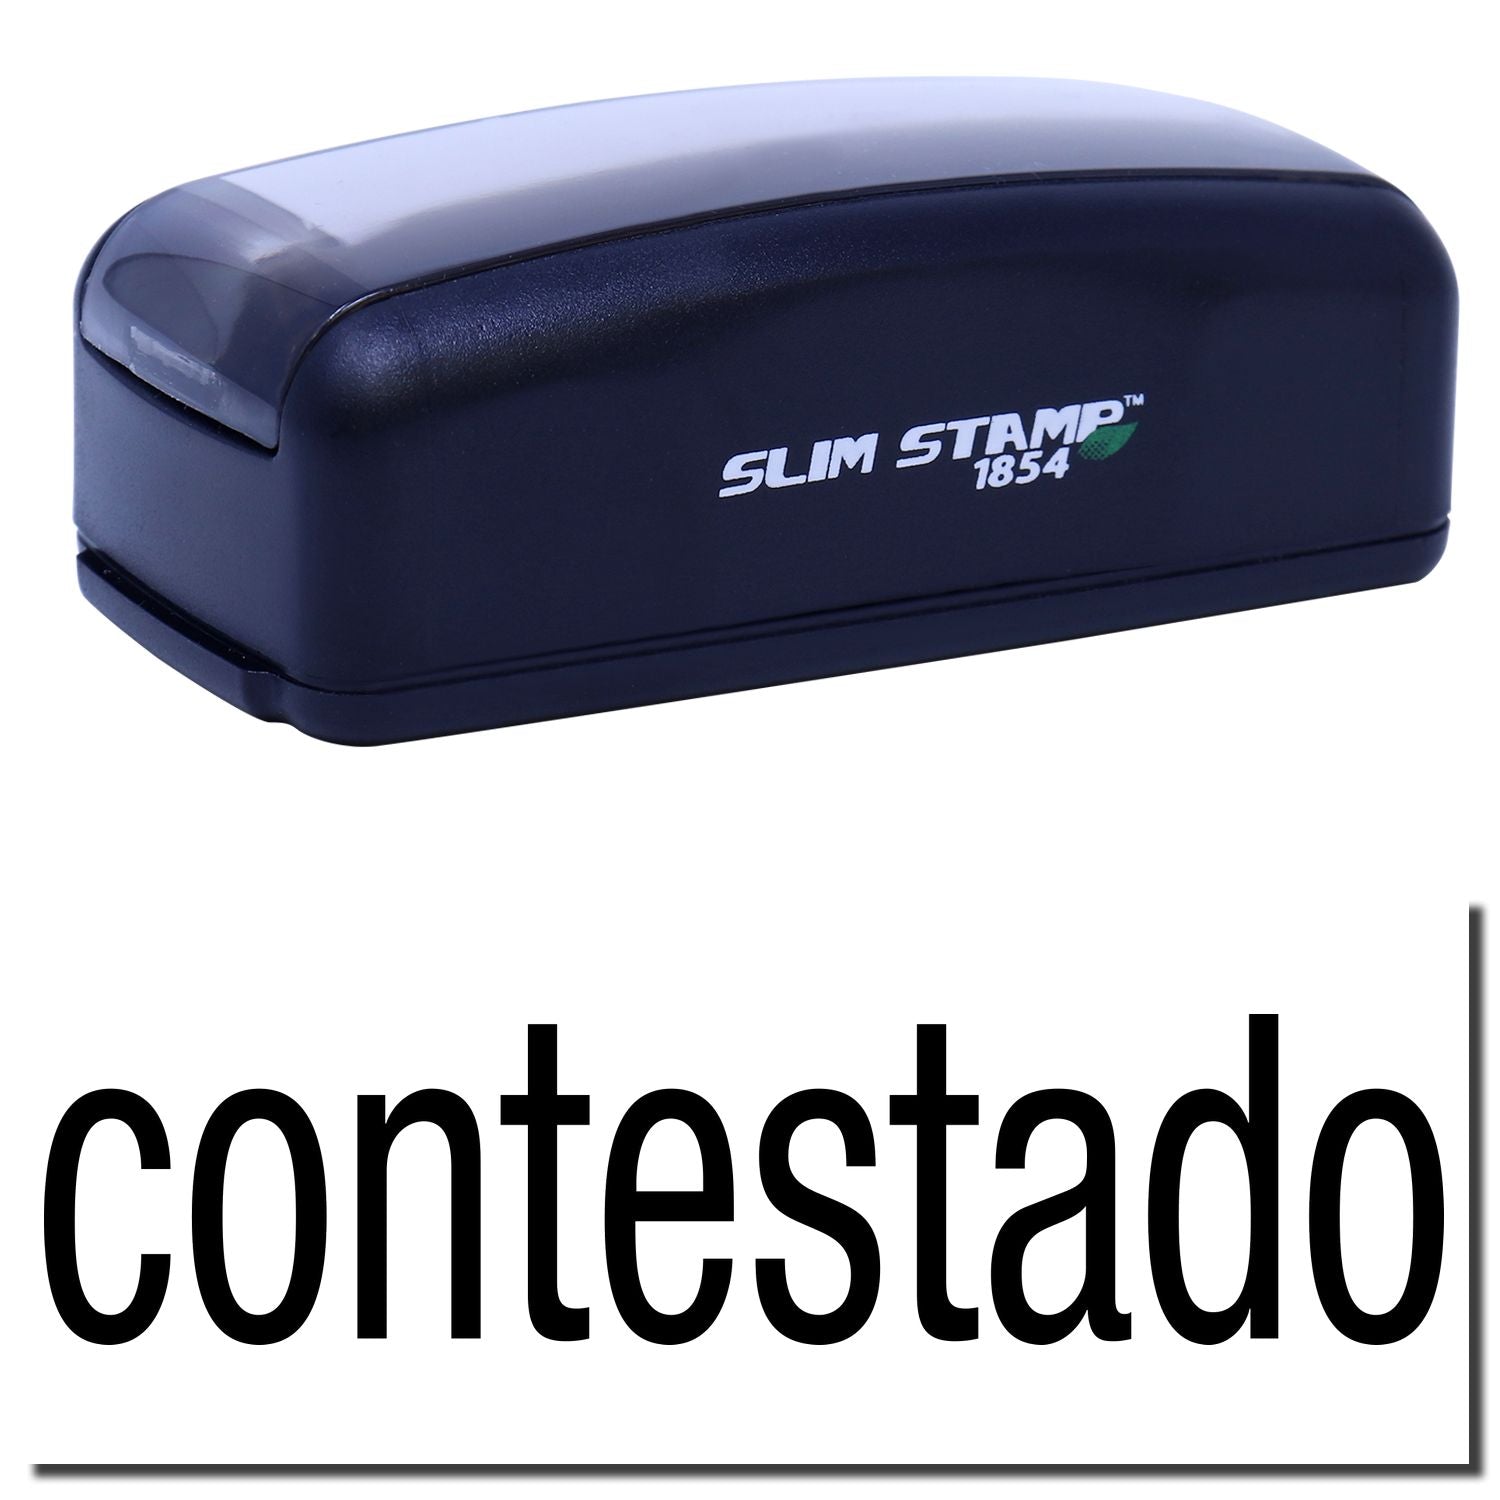 A stock office pre-inked stamp with a stamped image showing how the text "contestado" in a large font is displayed after stamping.